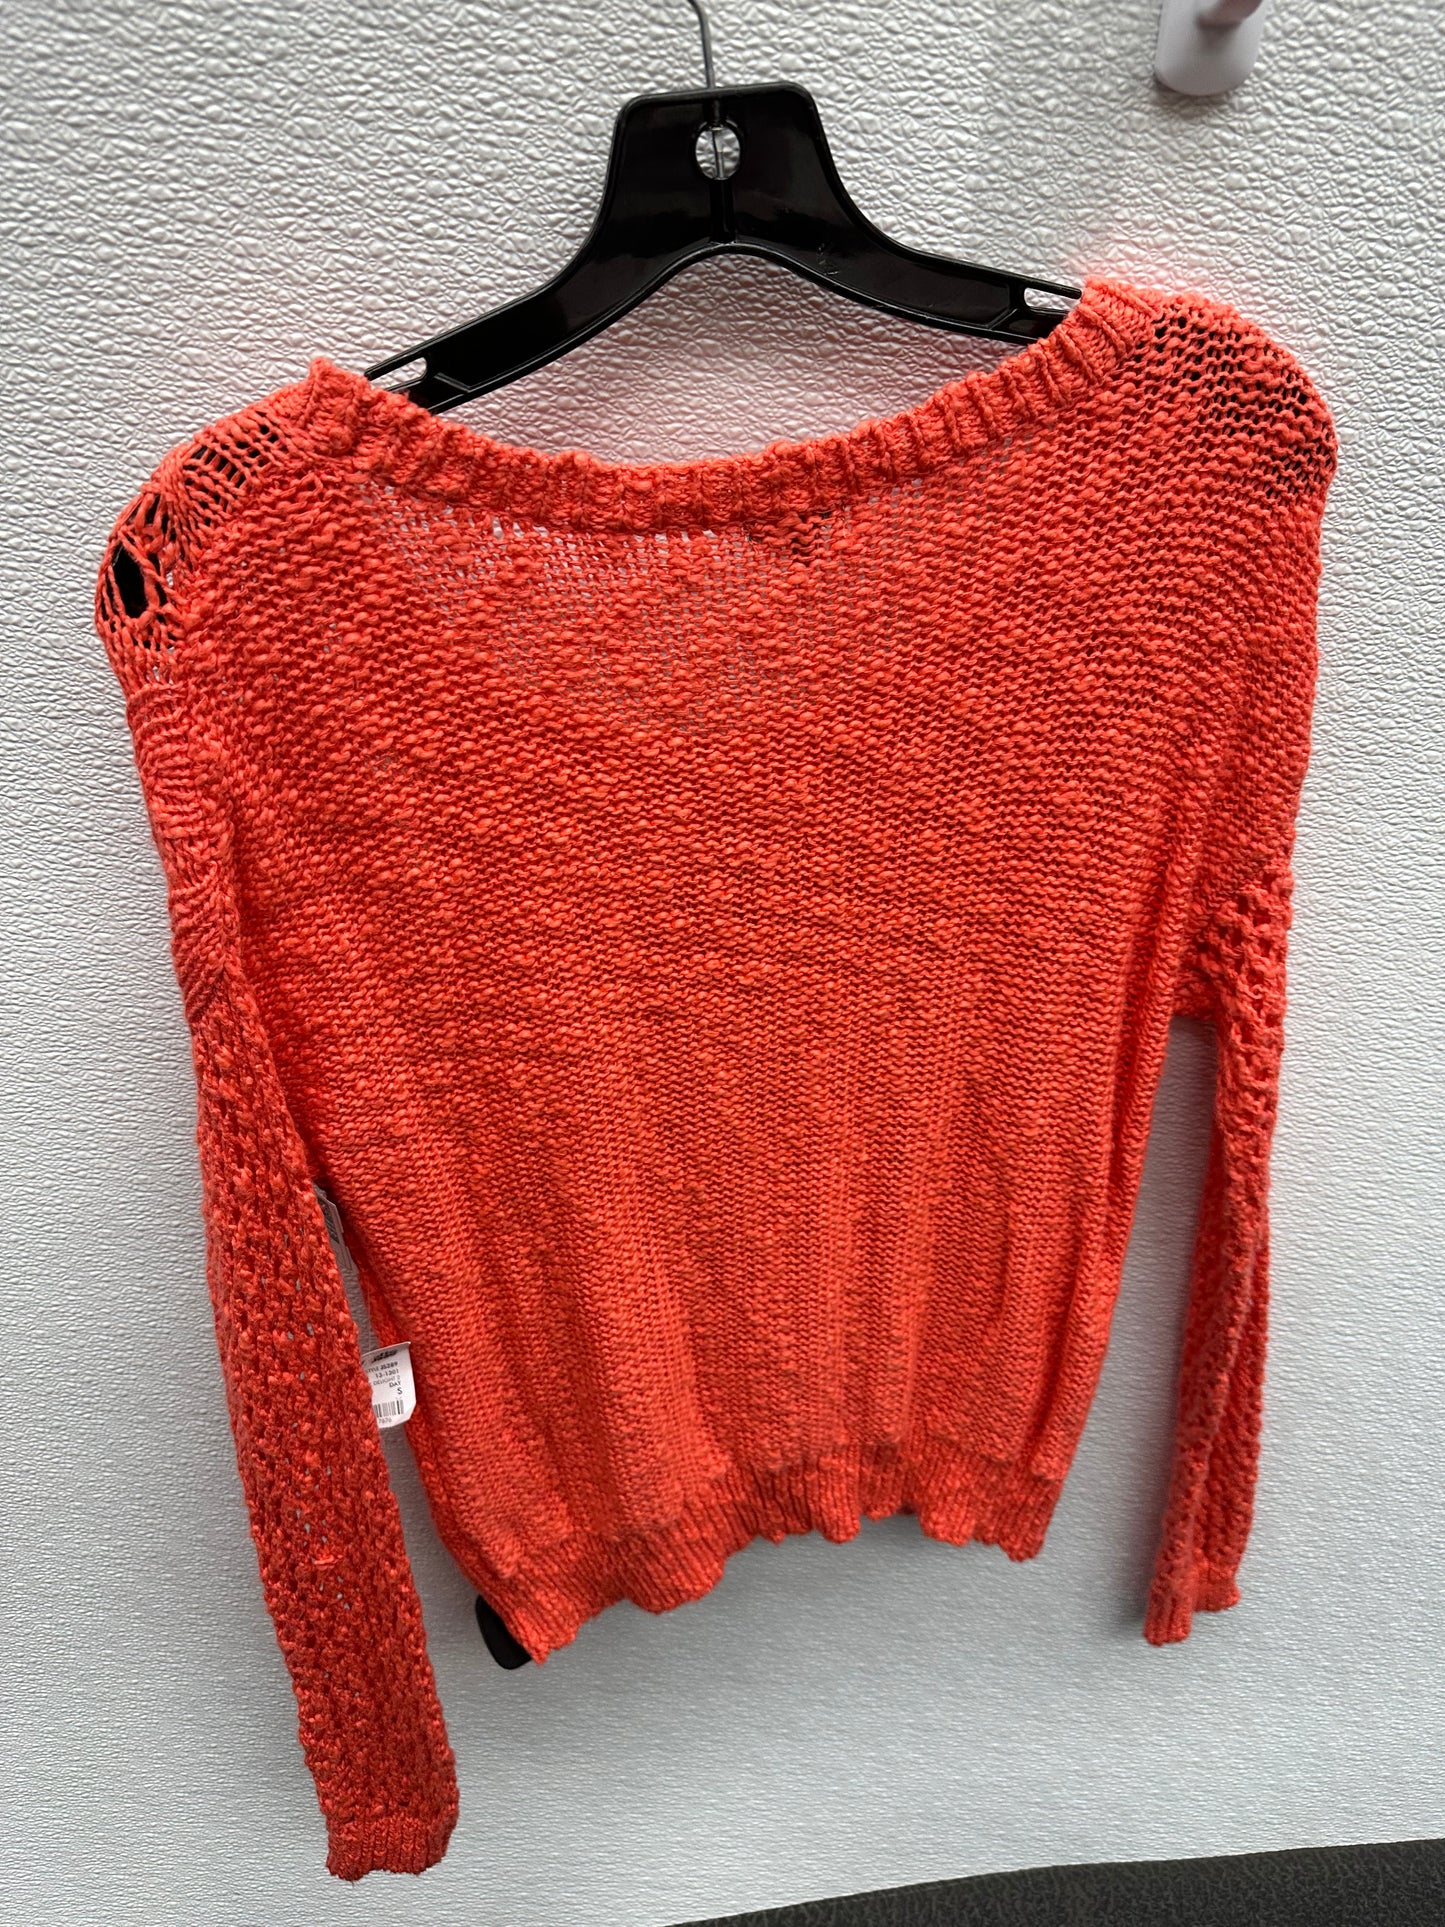 Sweater By Charlotte Russe  Size: S